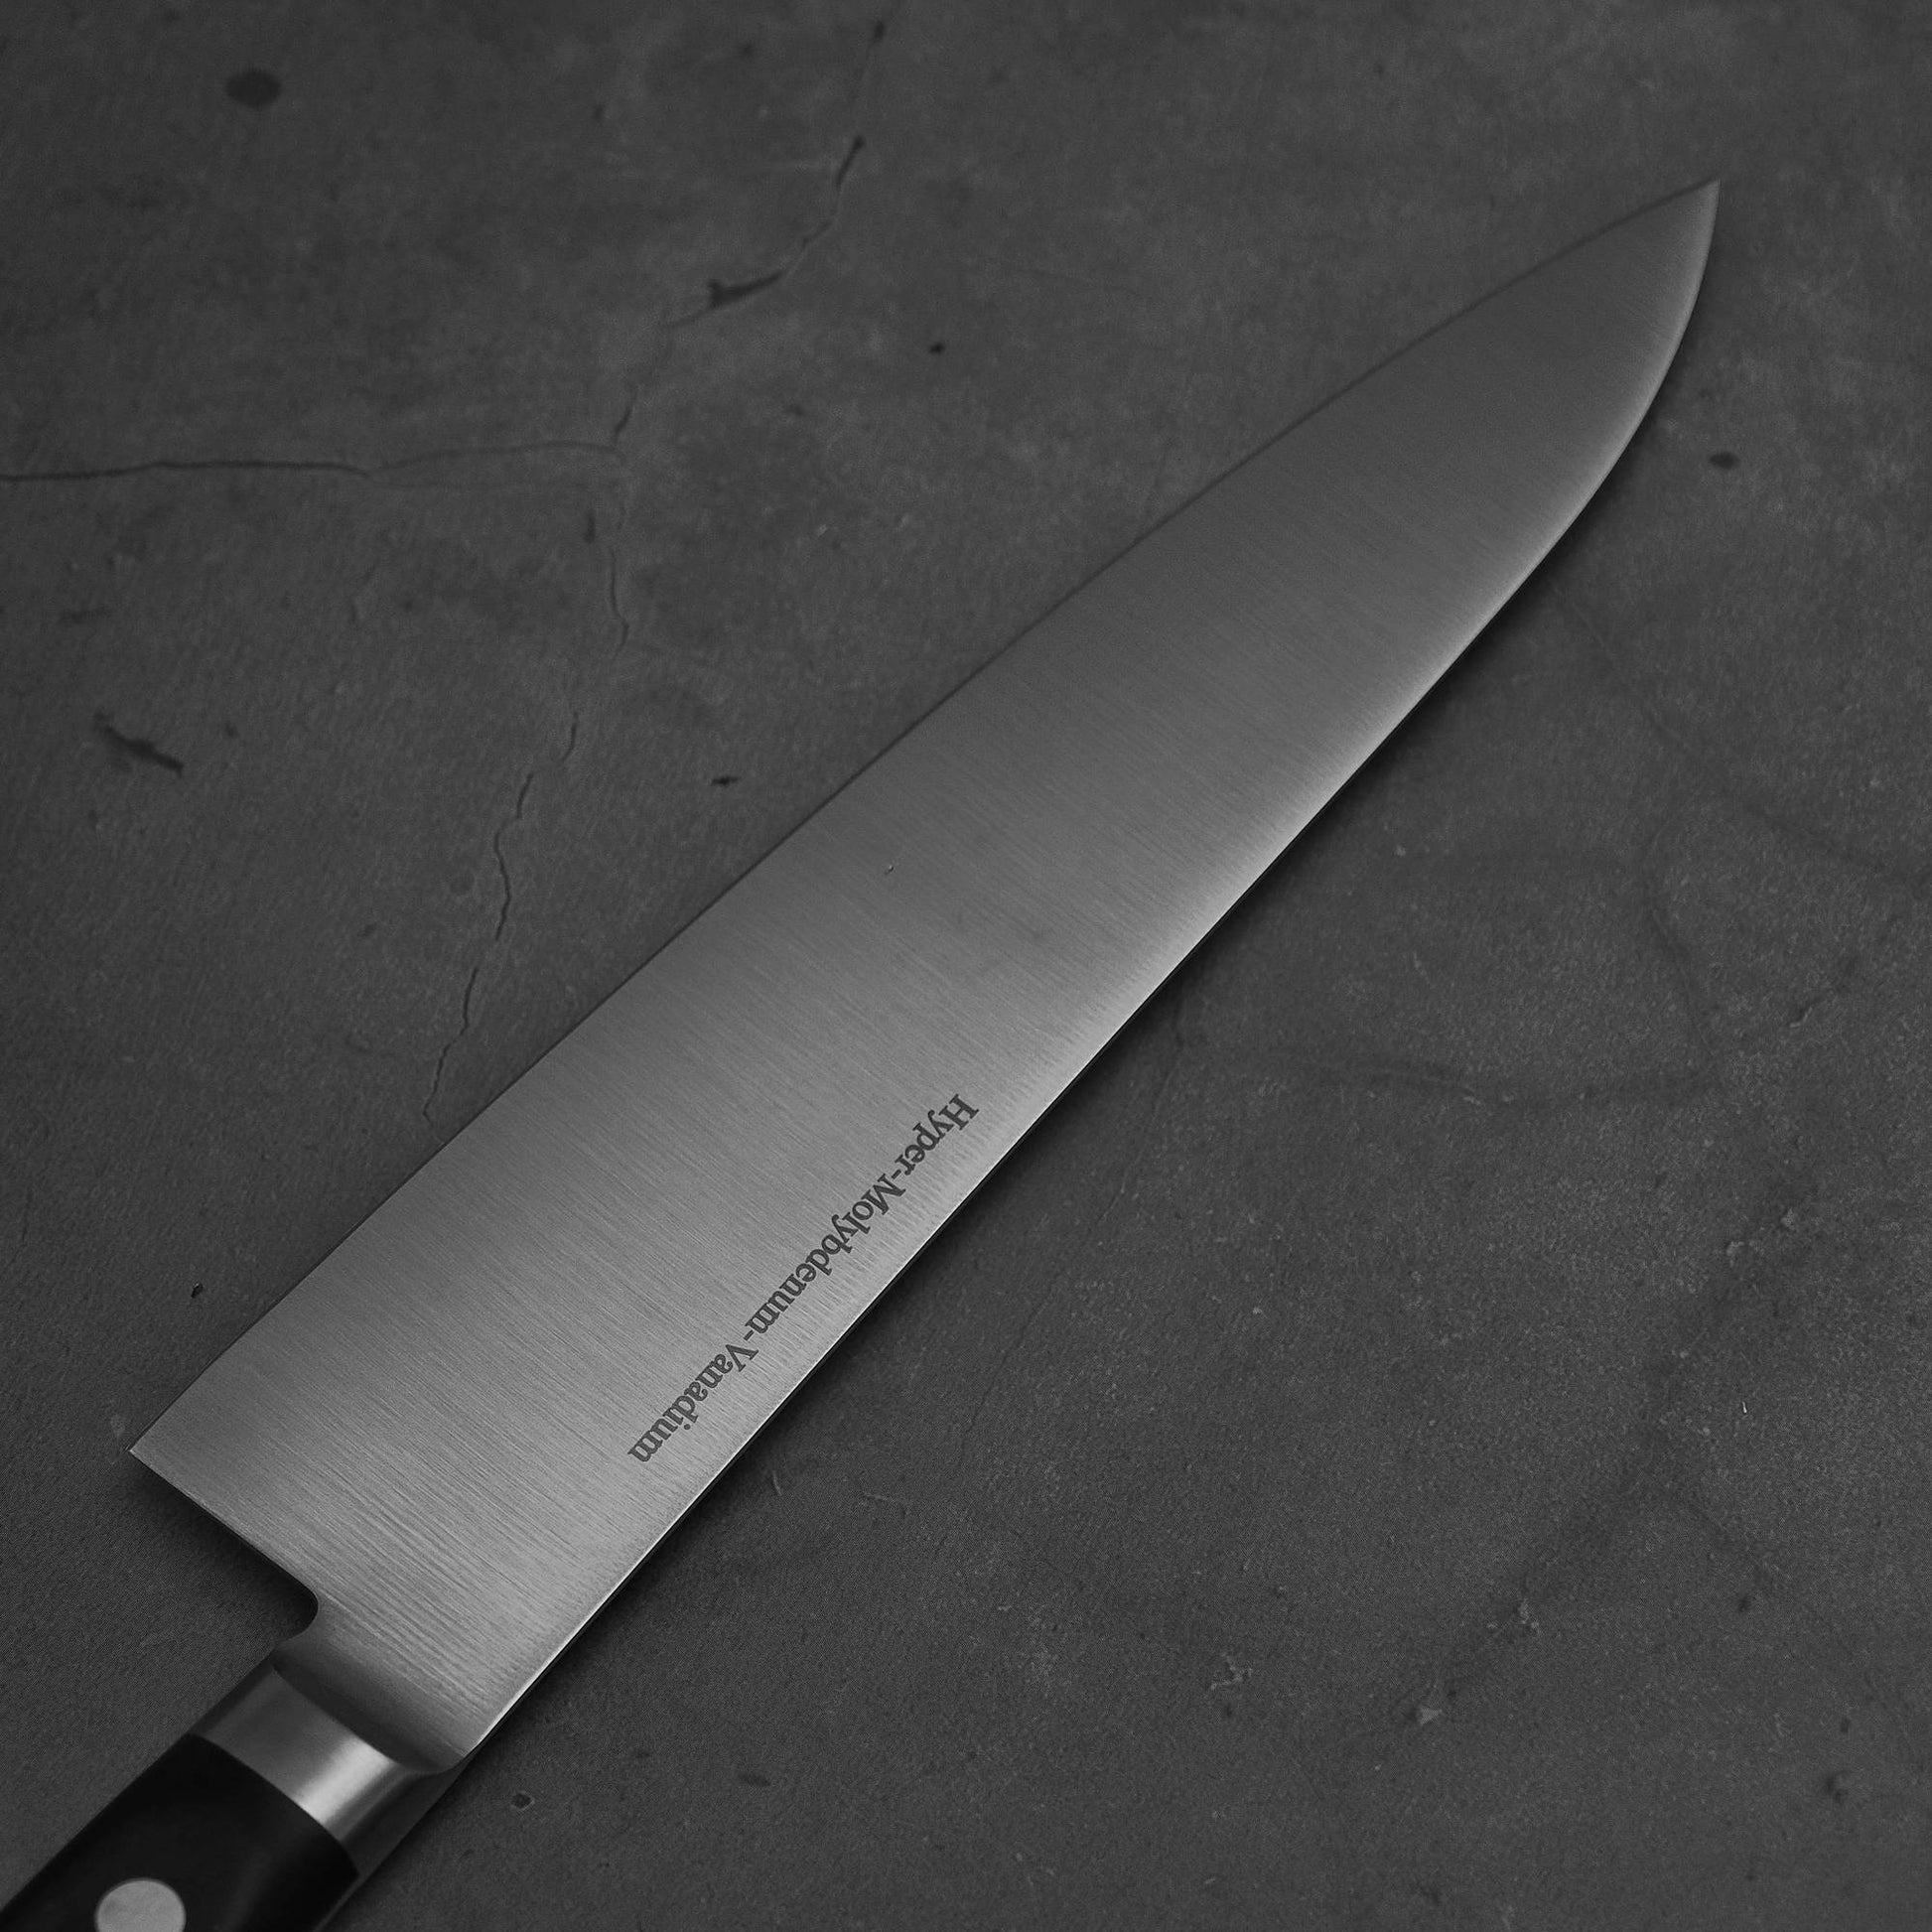 Close up view of the blade of Masamoto VG yo-gyuto knife. Image shows left side of the blade